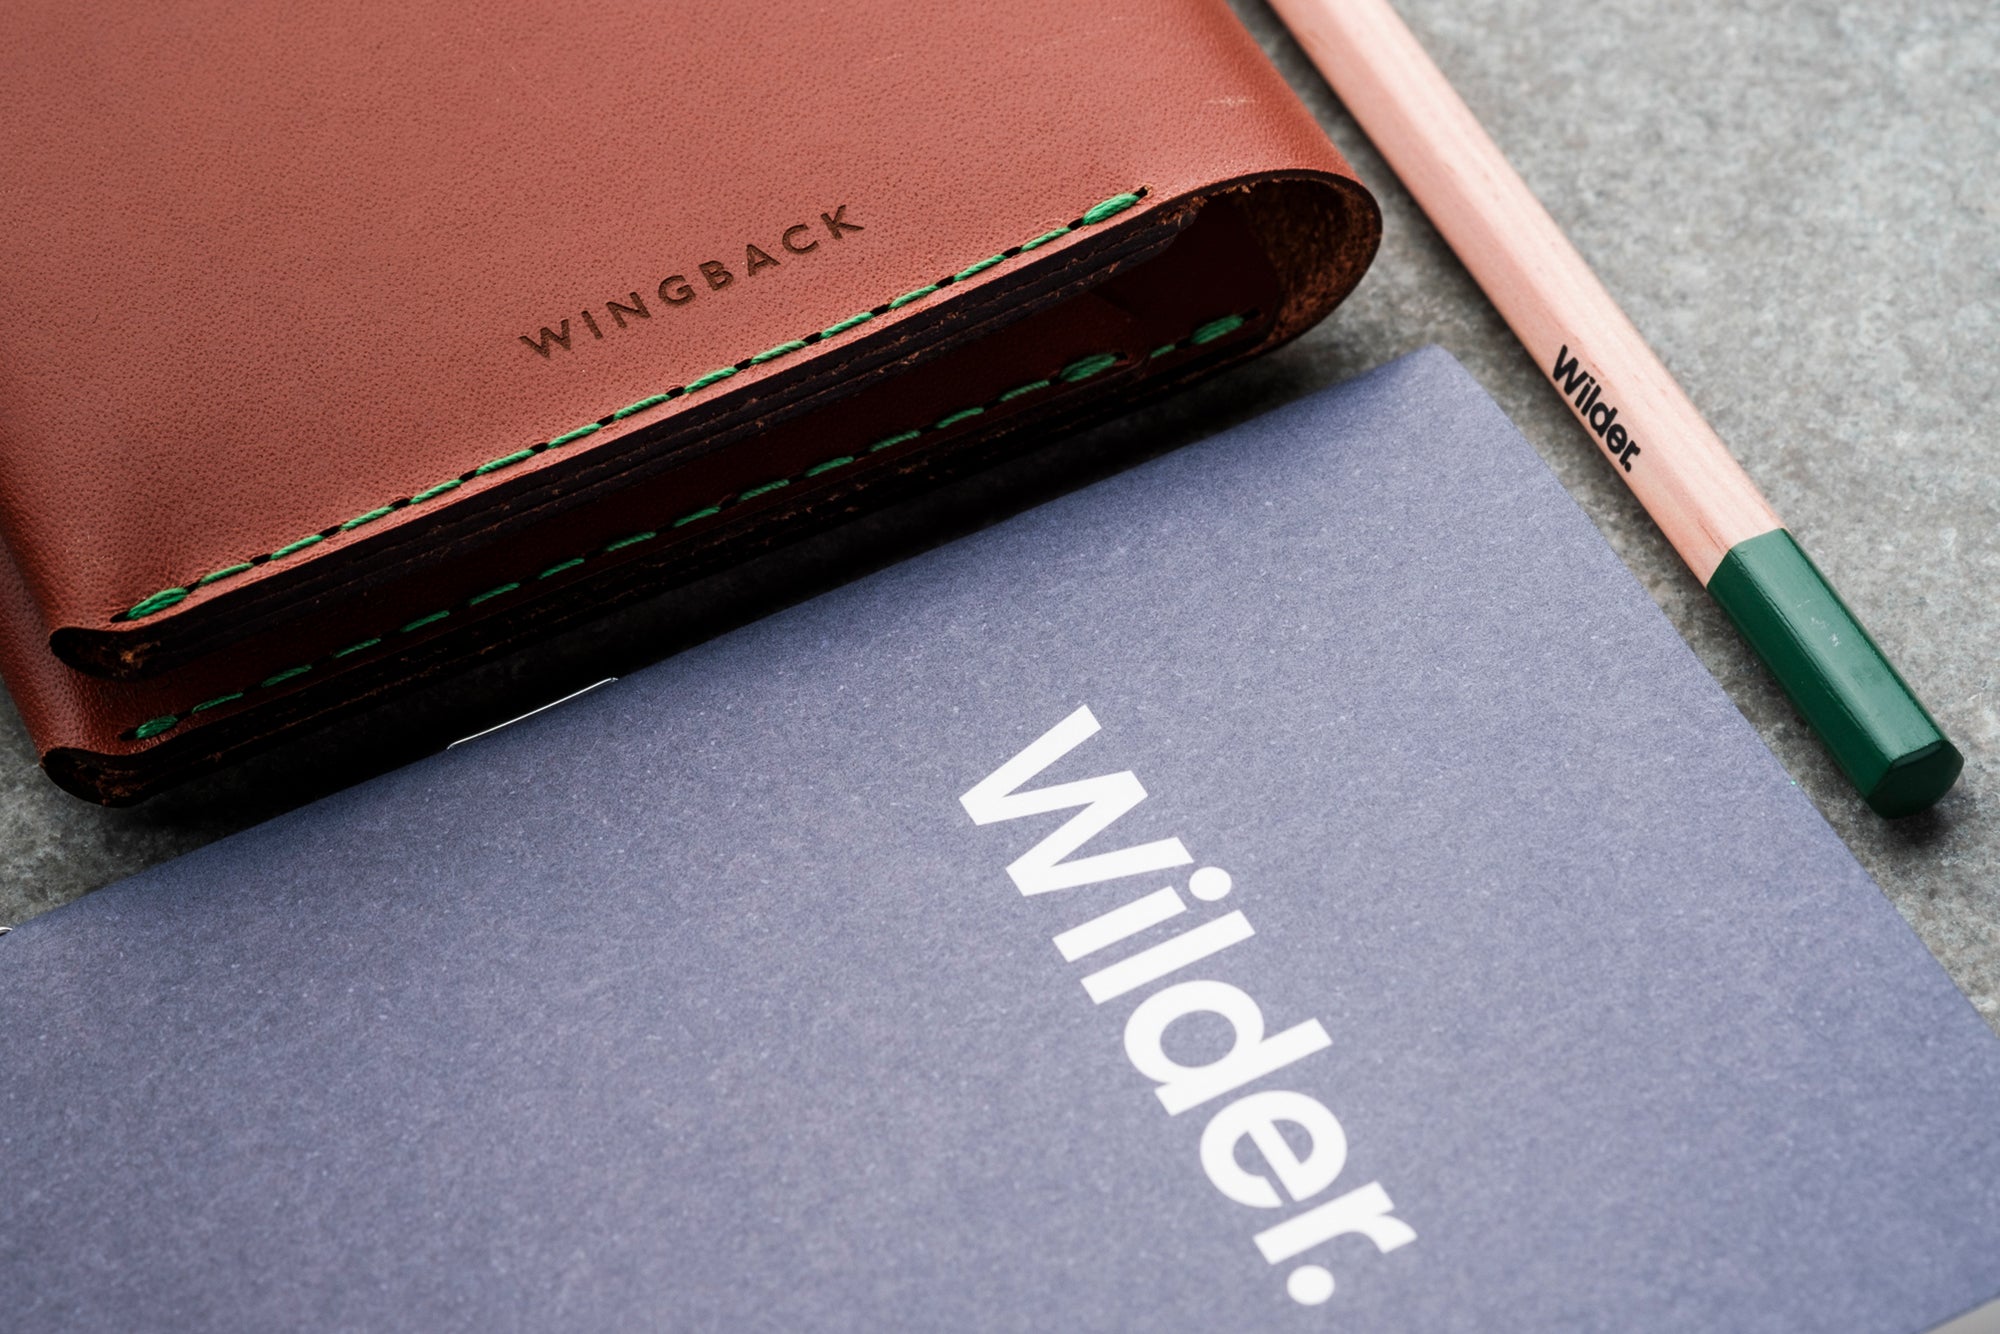 Wilder Notebooks X Wingback Travel Wallet - British made wallets and stationery